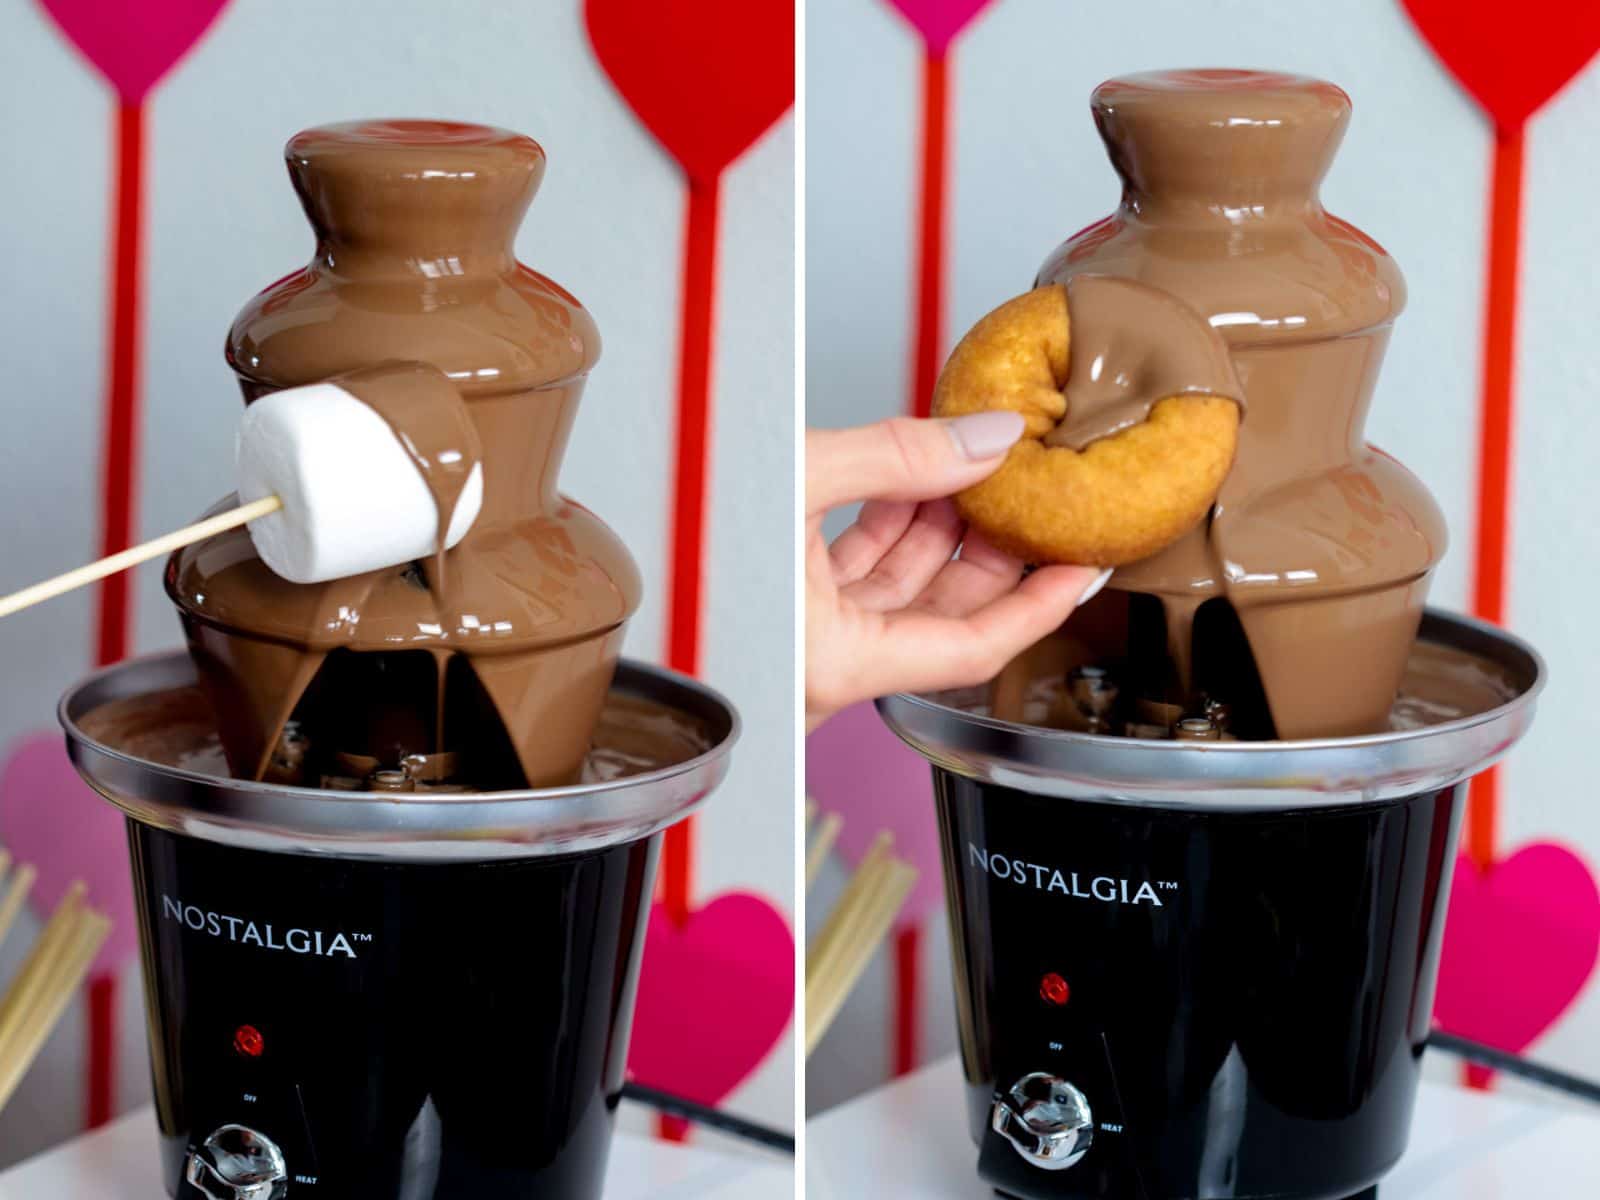 Chocolate fountain with a donut and marshmallow being coated.